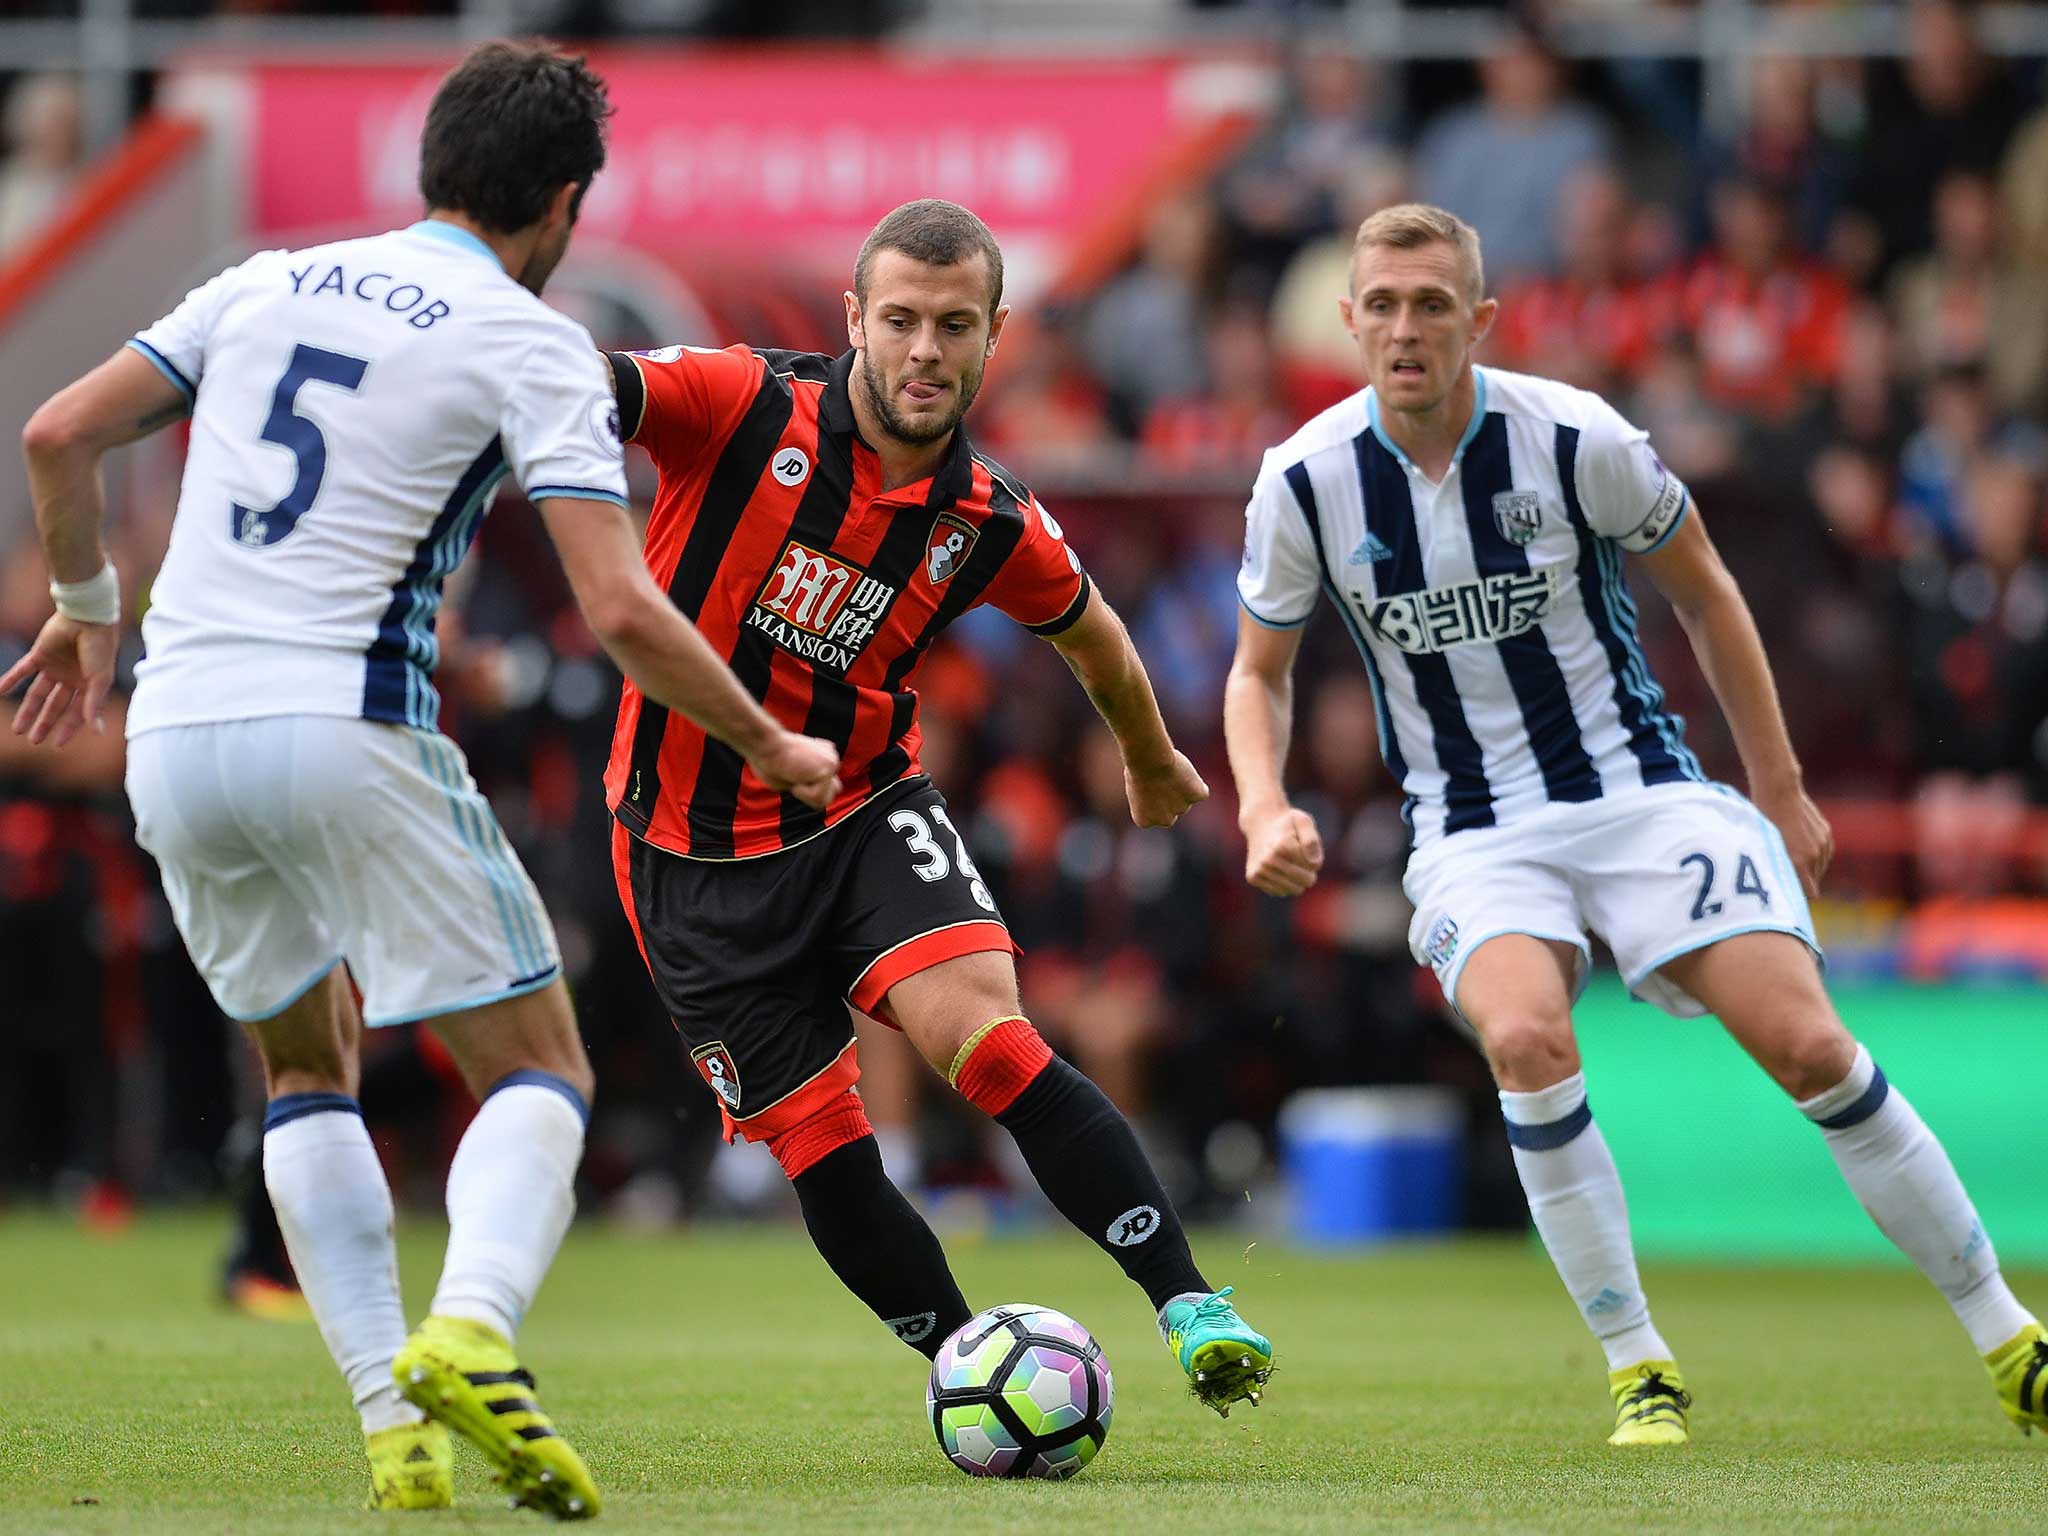 Jack Wilshere made his debut for Bournemouth against West Bromwich